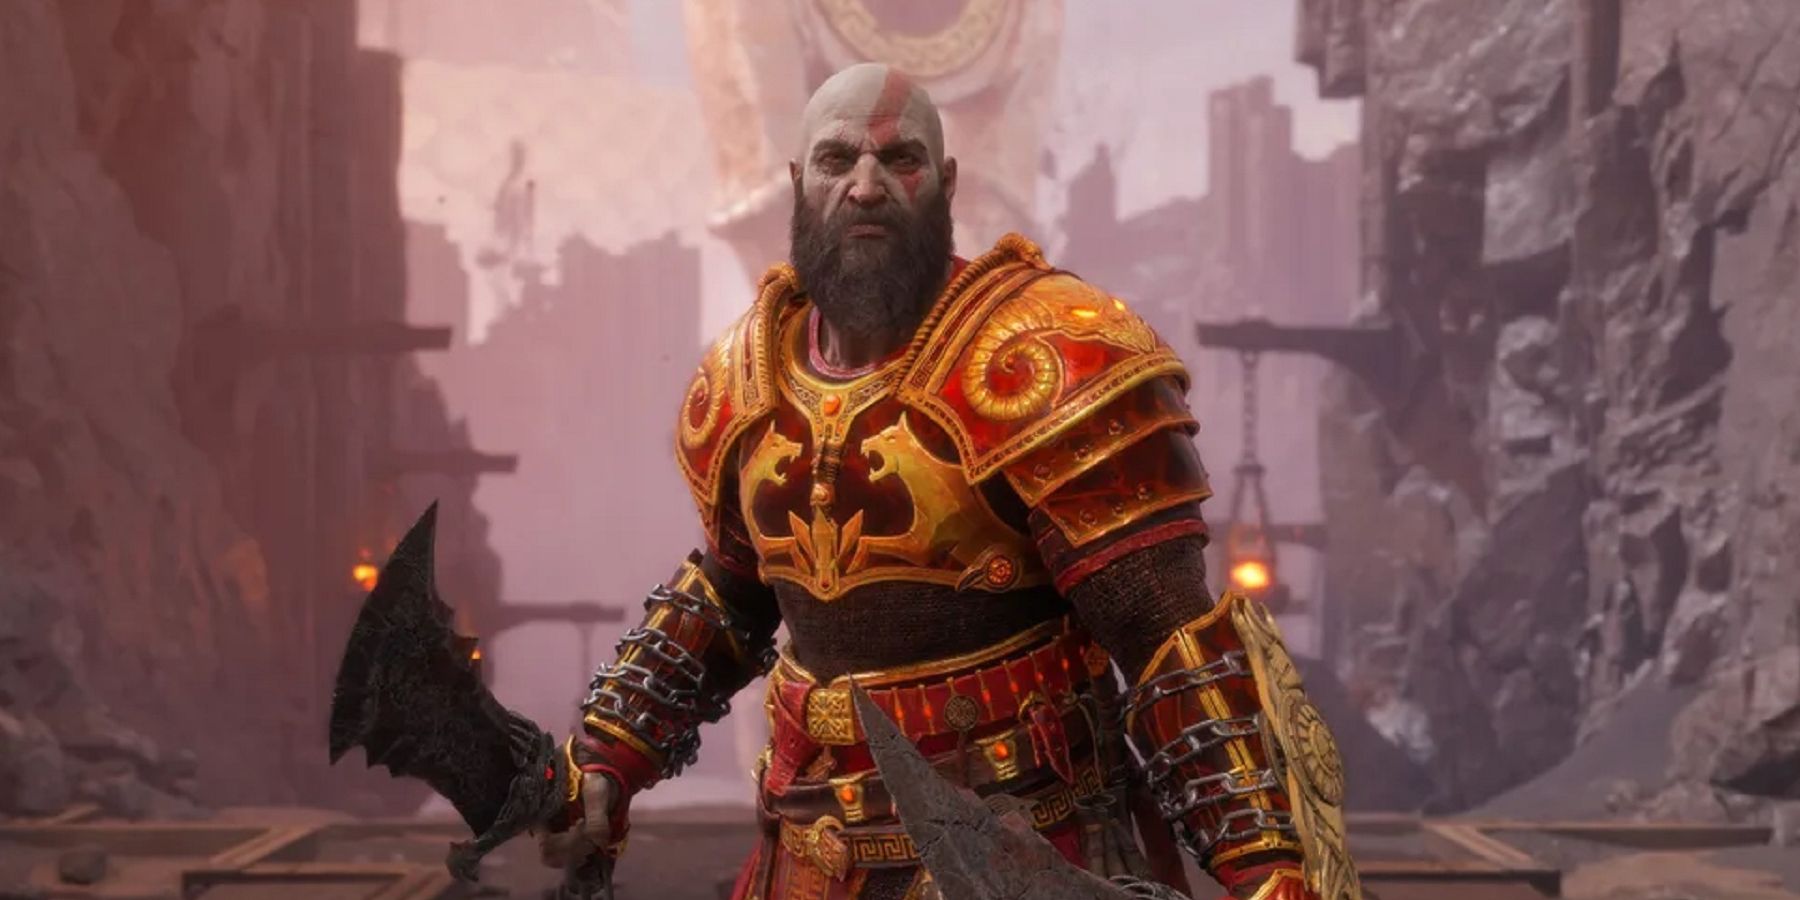 Kratos, in gold and red armor, readies his sword in a screenshot for the new God of War Ragnarok DLC.